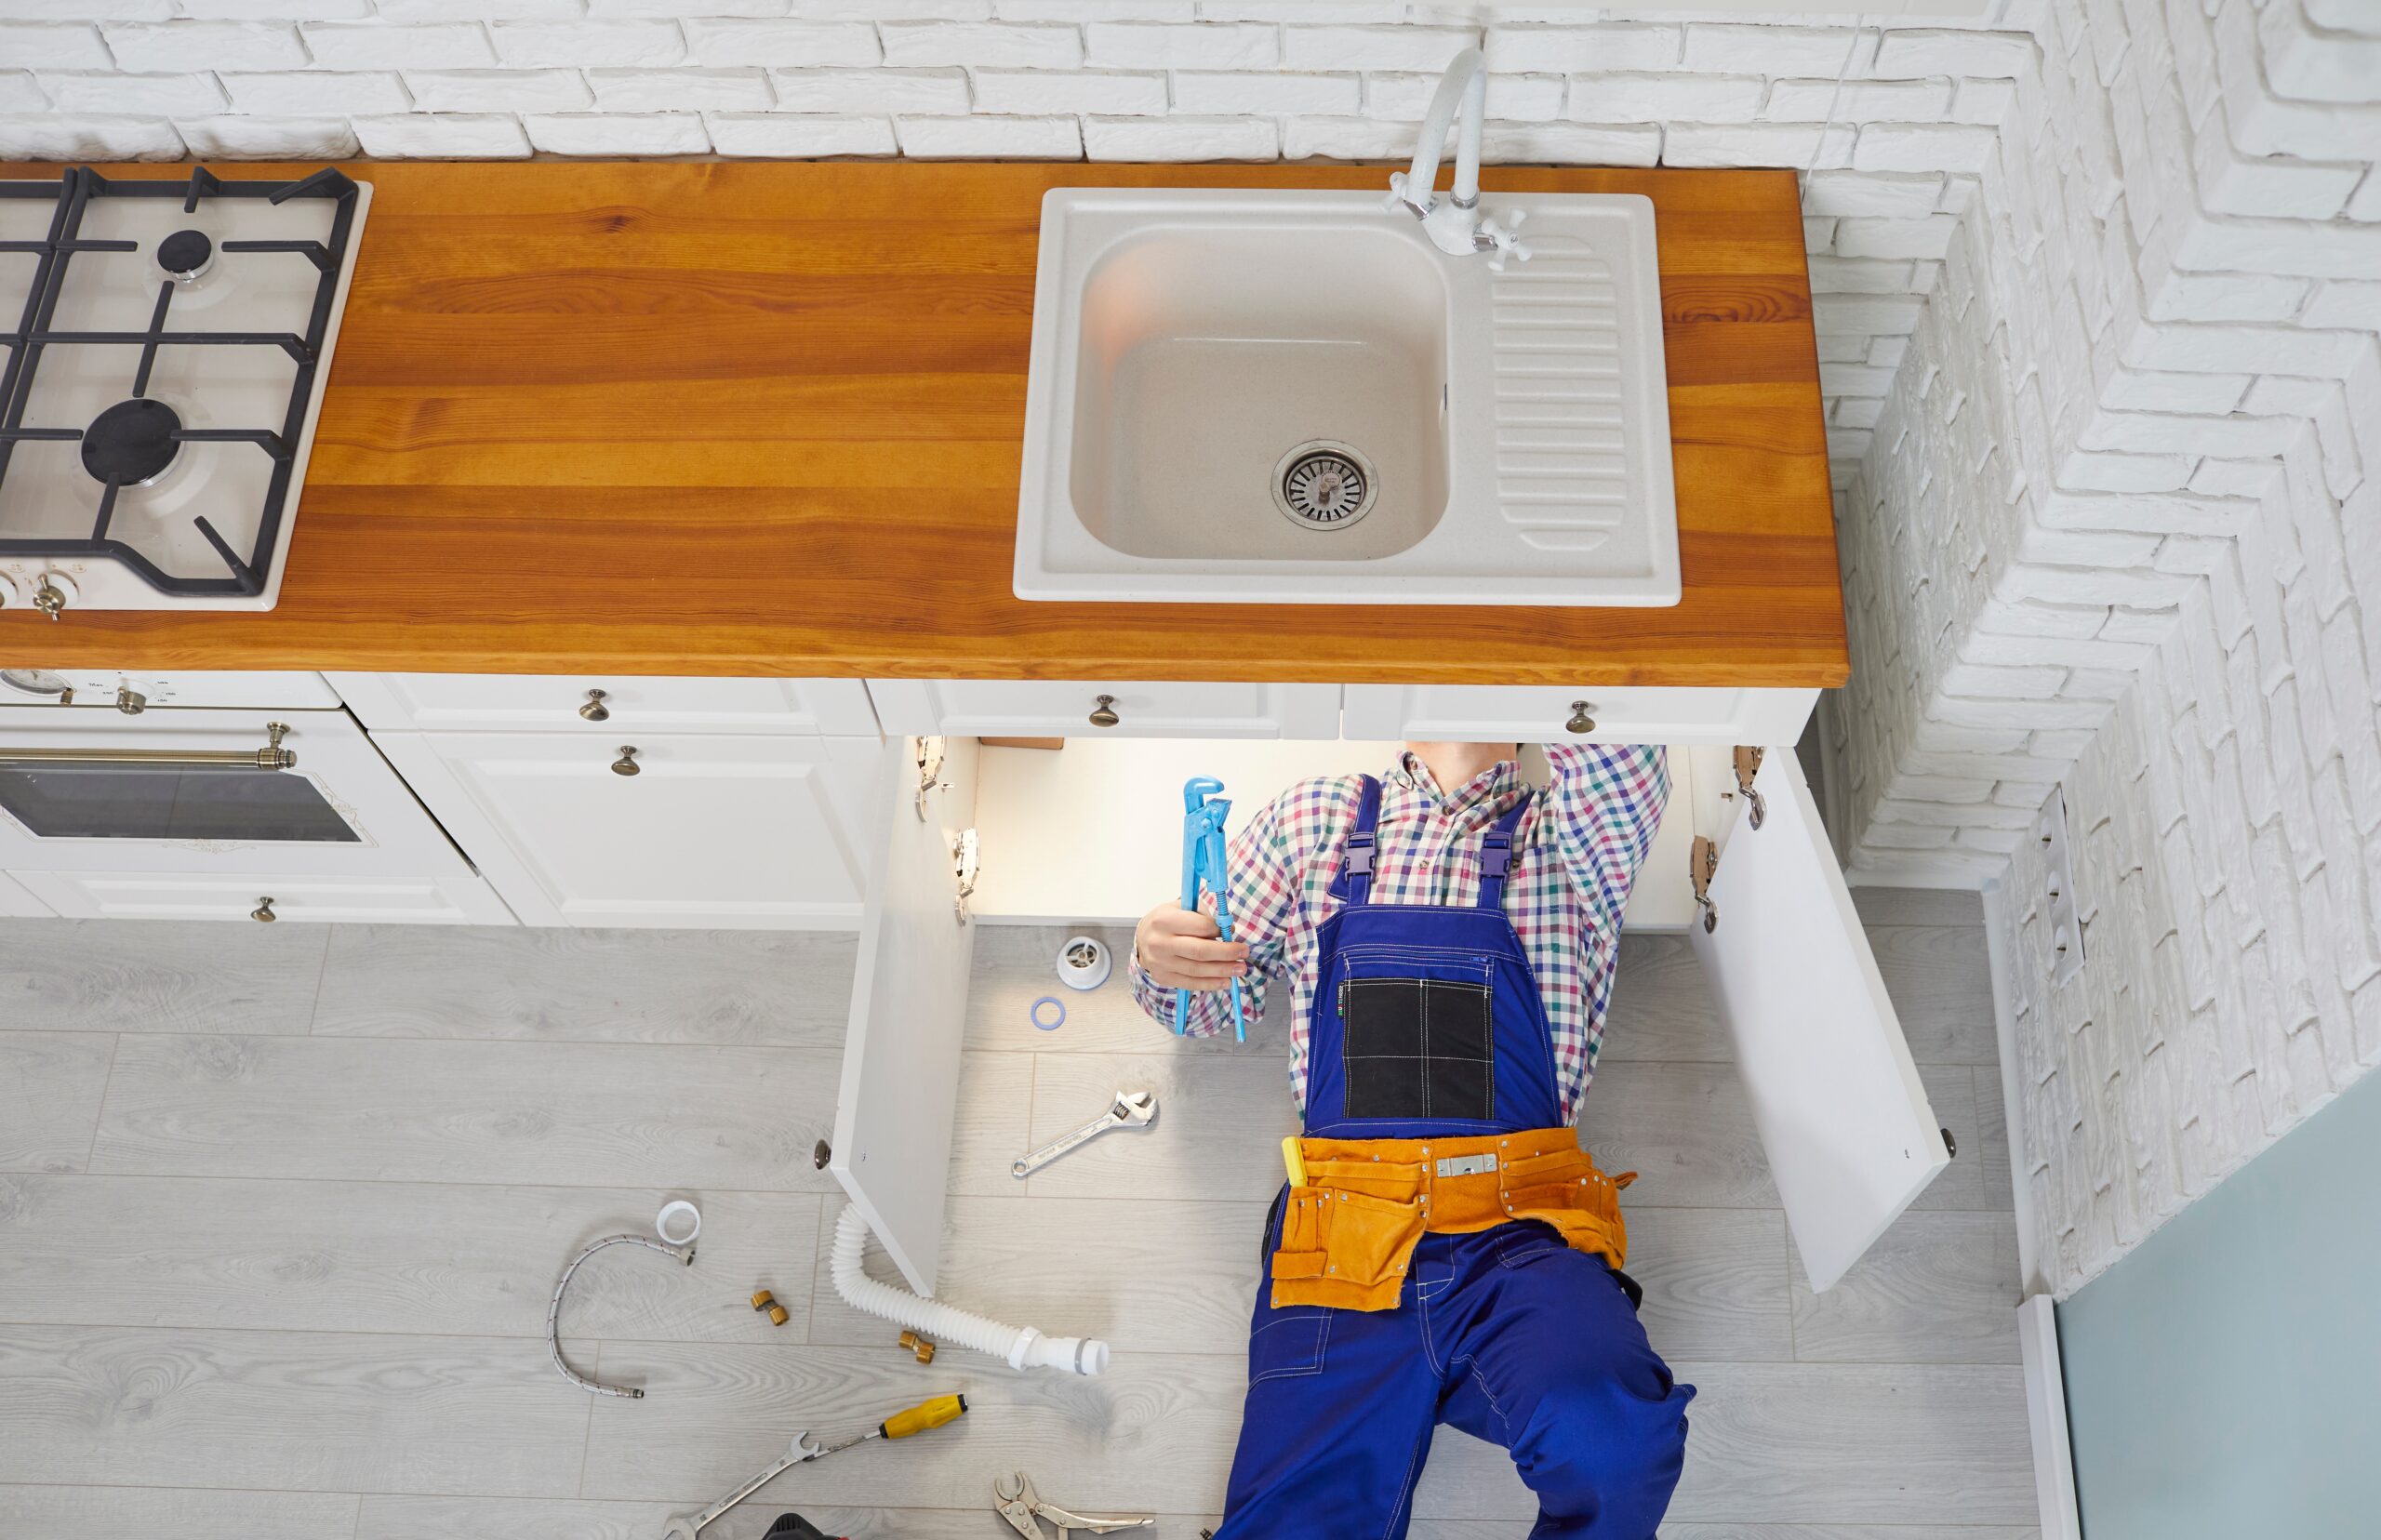 Top down view of a residential plumber working under a kitchen sink